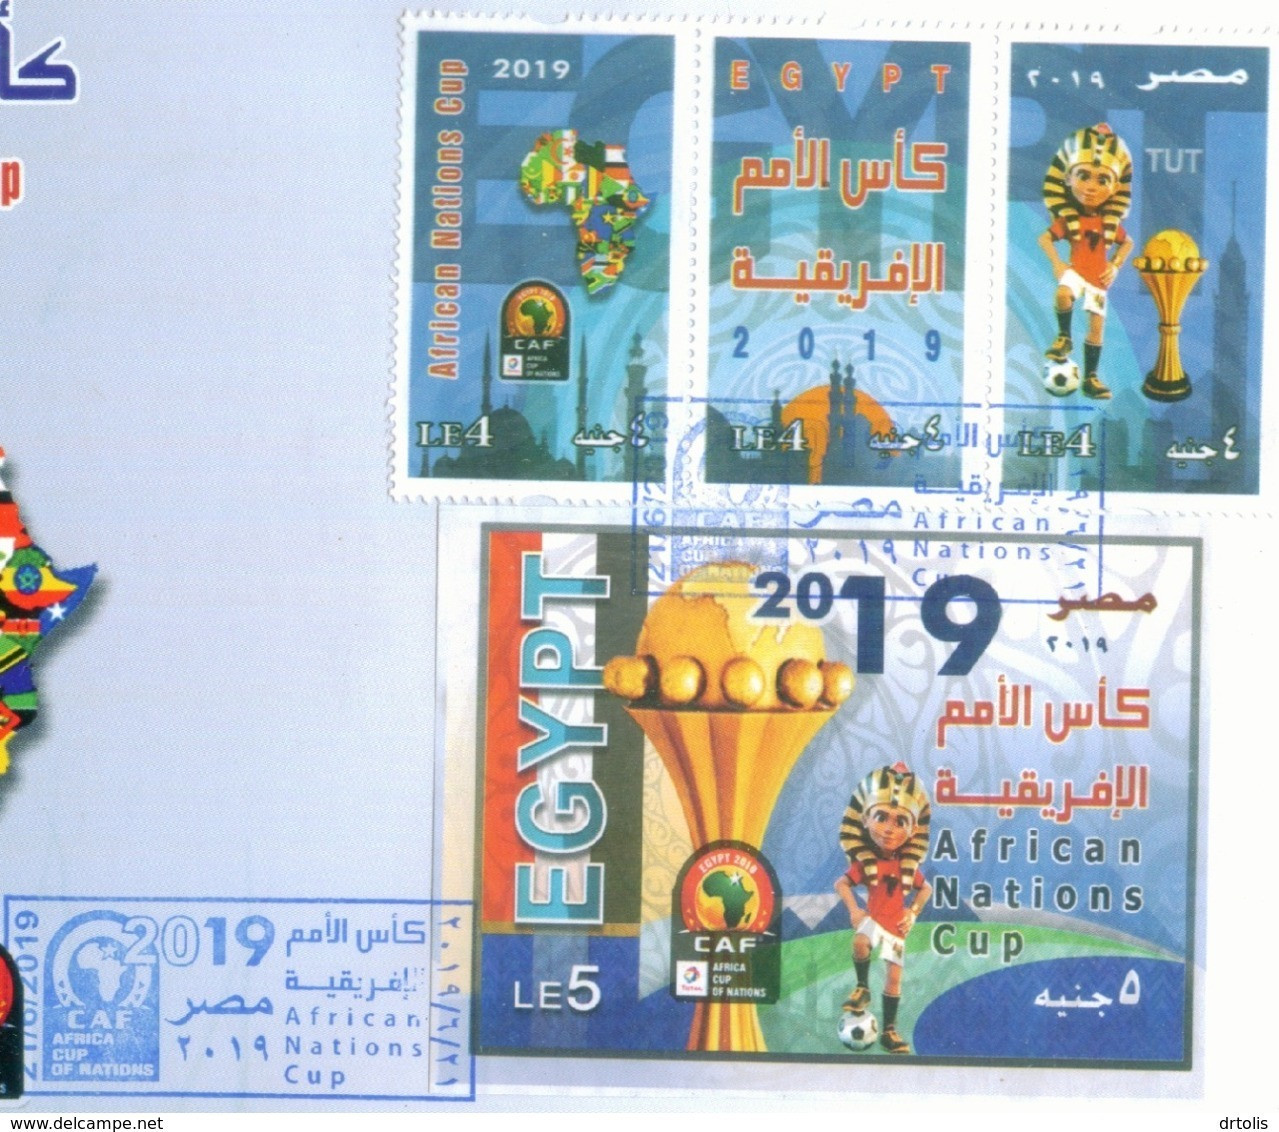 EGYPT / 2019 / AFRICAN NATIONS CUP / SPORT / FOOTBALL / CAF / MAP / FLAG / TUT / FDC - Covers & Documents